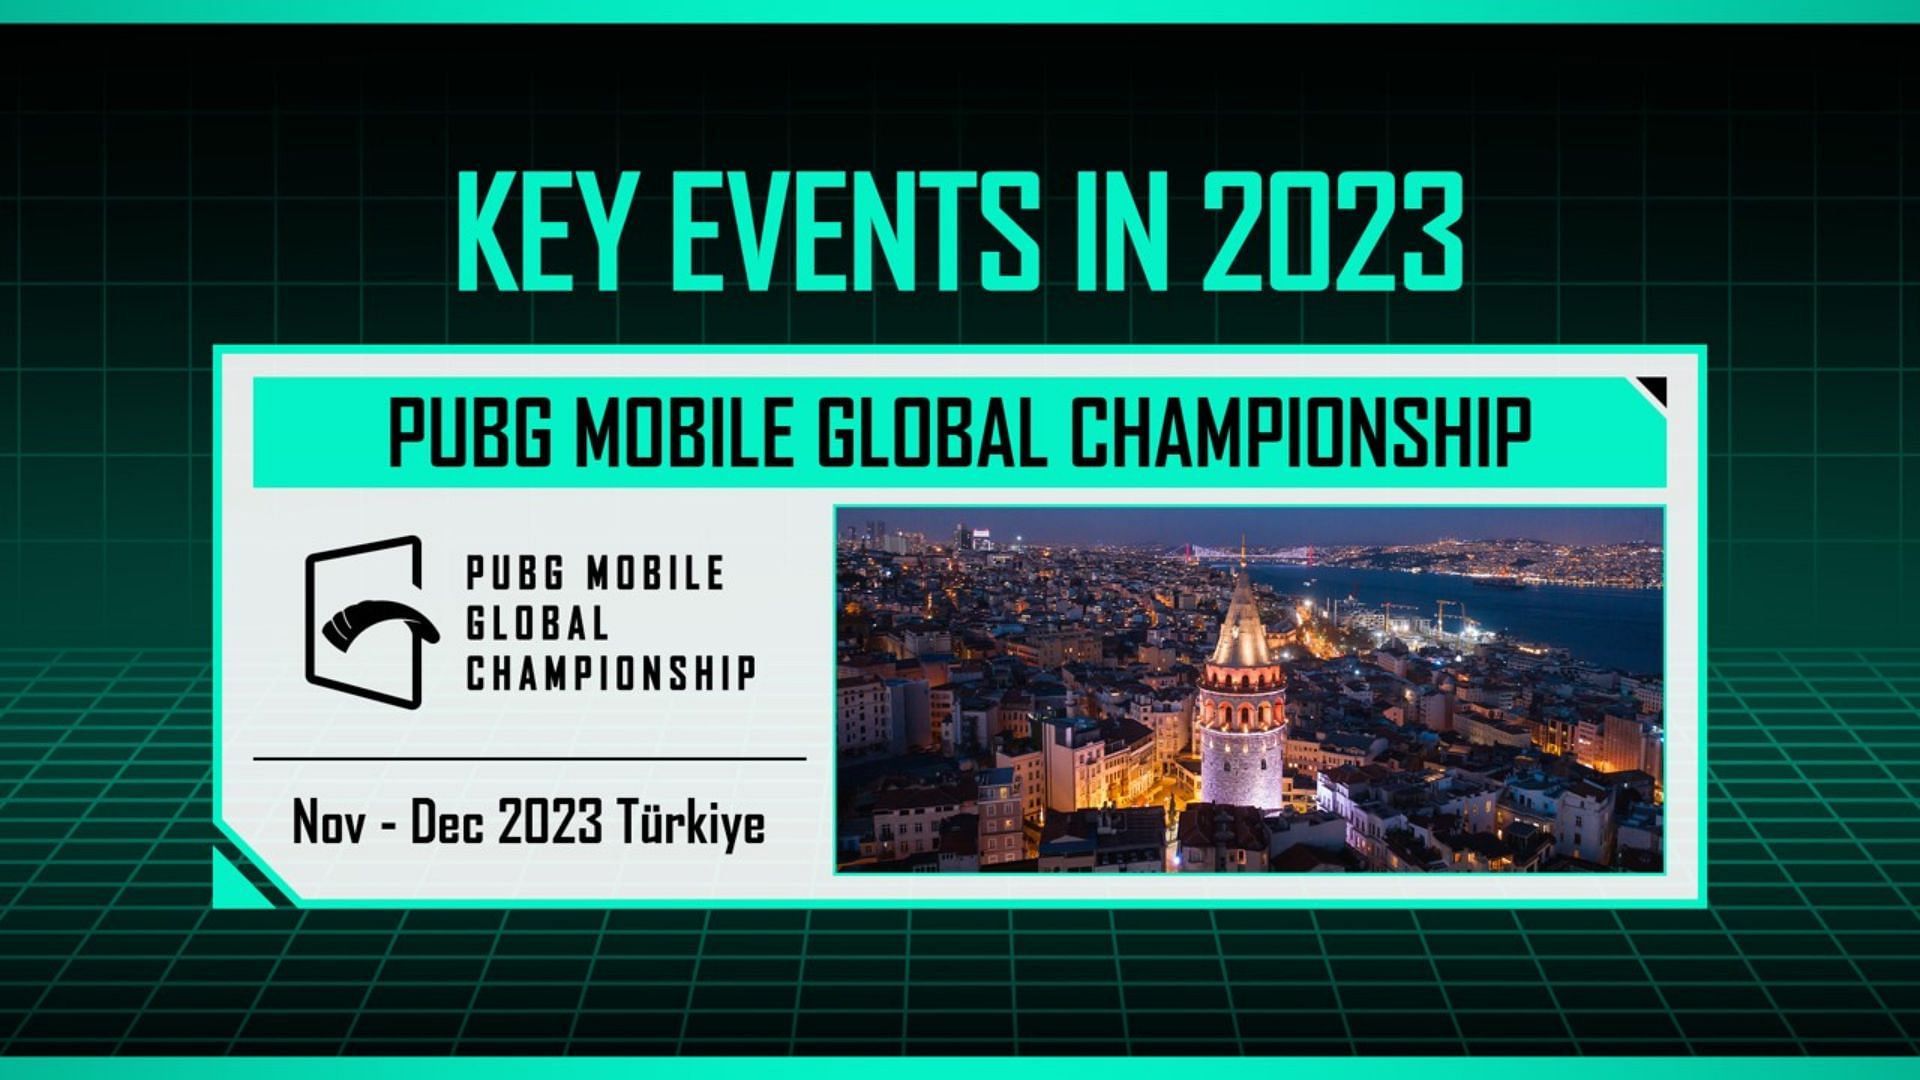 PMGC 2023 will be played in Turkey (Image via PUBG Mobile)